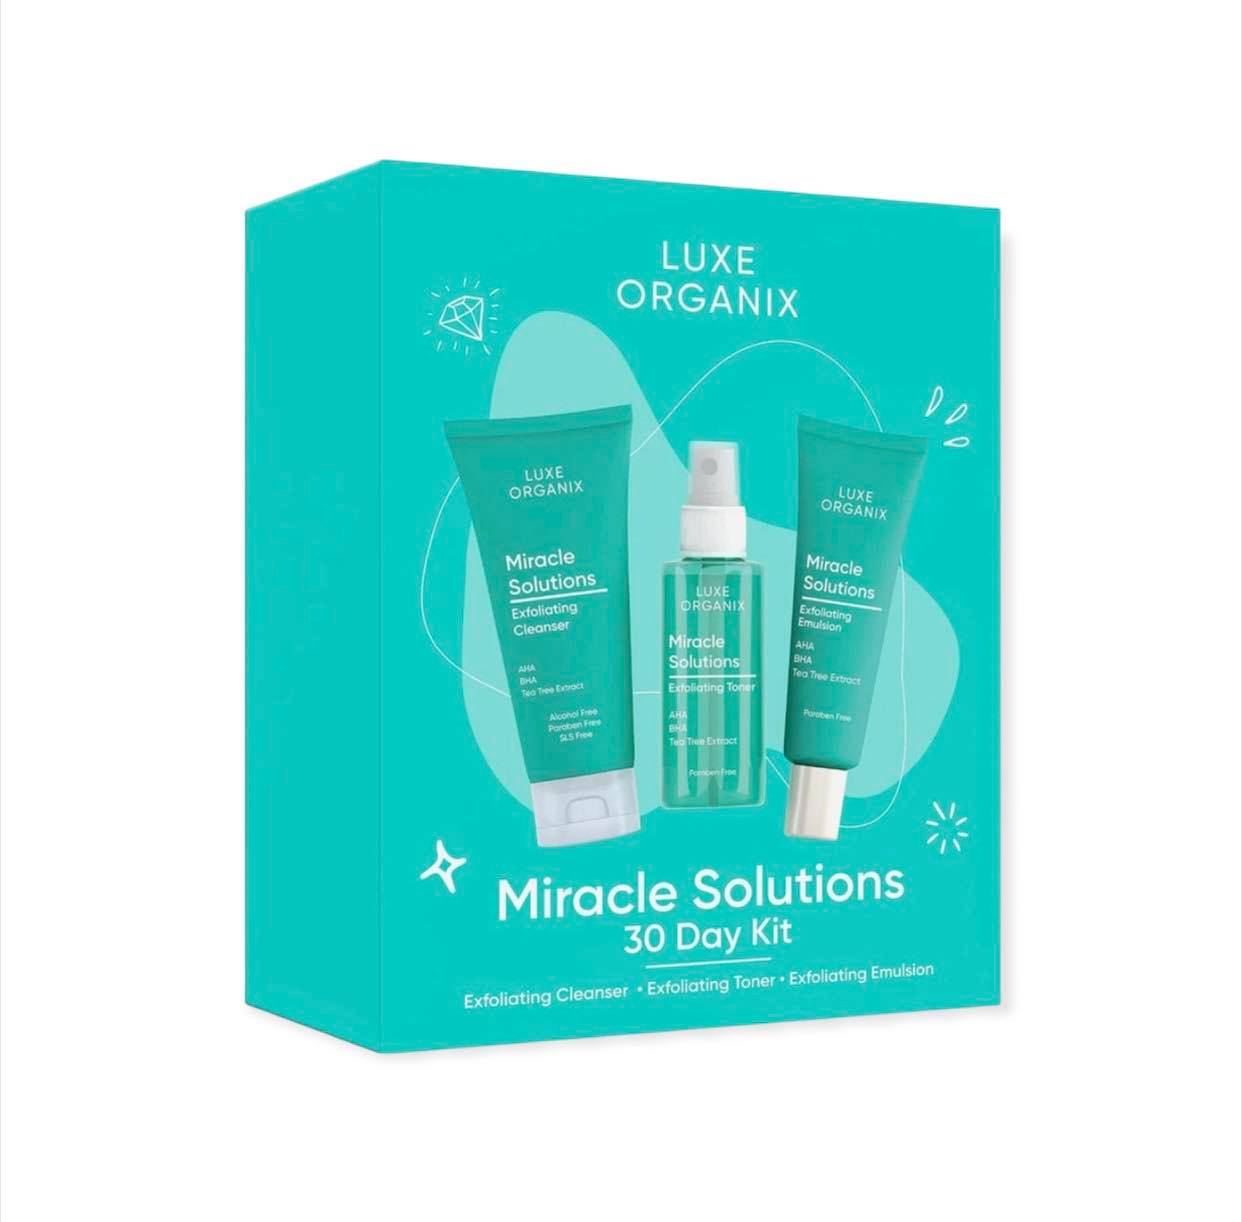 LUXE ORGANIX MIRACLE SOLUTIONS 30 DAY KIT